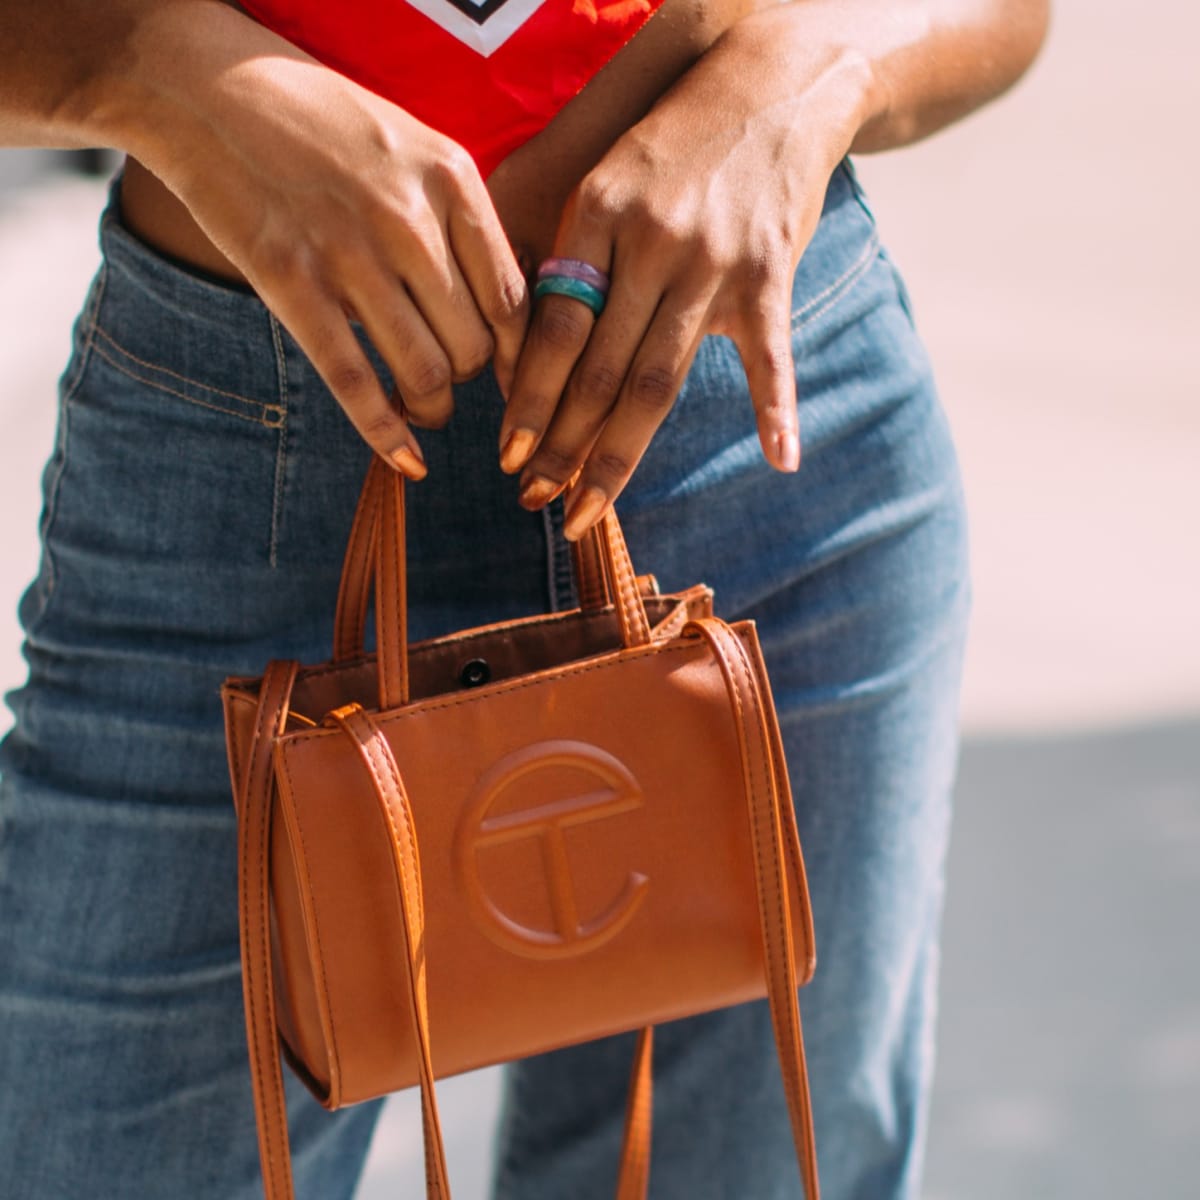 Telfar Introduces 'Bag Security Program' for Its Beloved Shopping